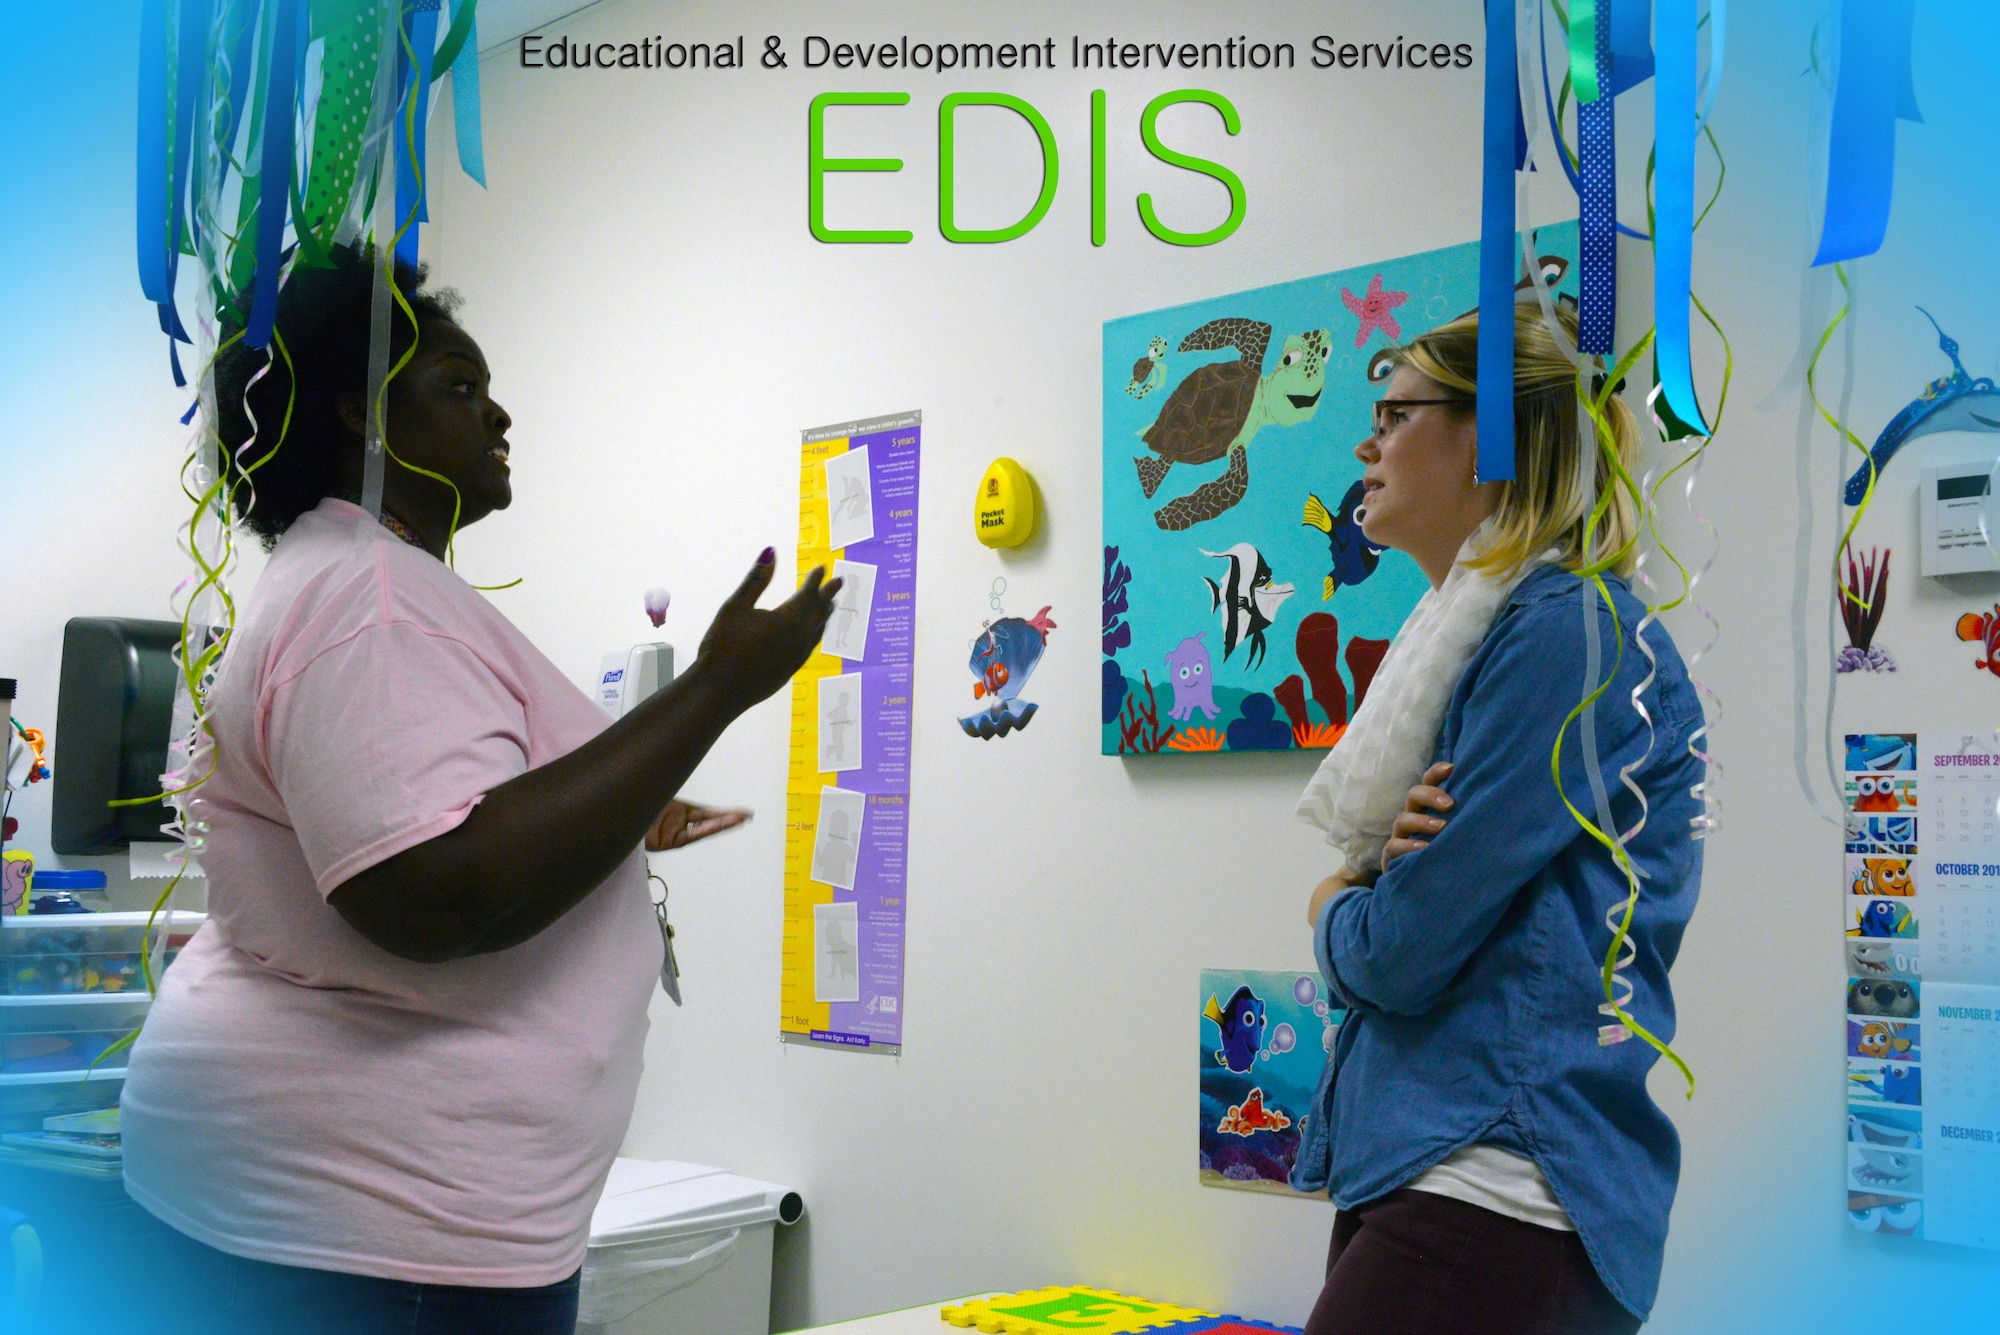 Neirissa Keeler speaks with a parent during an EDIS Program open house at the Maxwell AFB Clinic Oct. 21, 2016. EDIS stands for educational and developmental intervention services. Keeler, an early childhood special educator and EDIS element chief, offers developmental screening for any child with access to the Maxwell Clinic. Her element can offer advice, support and learning material for those who are missing some developmental milestones, and can also offer parents support on general topics ranging from potty training to helping with picky eating for any child. Keeler recommends all parents have their children screened before age 2. (U.S. Air Force photo by SrA William Blankenship)  